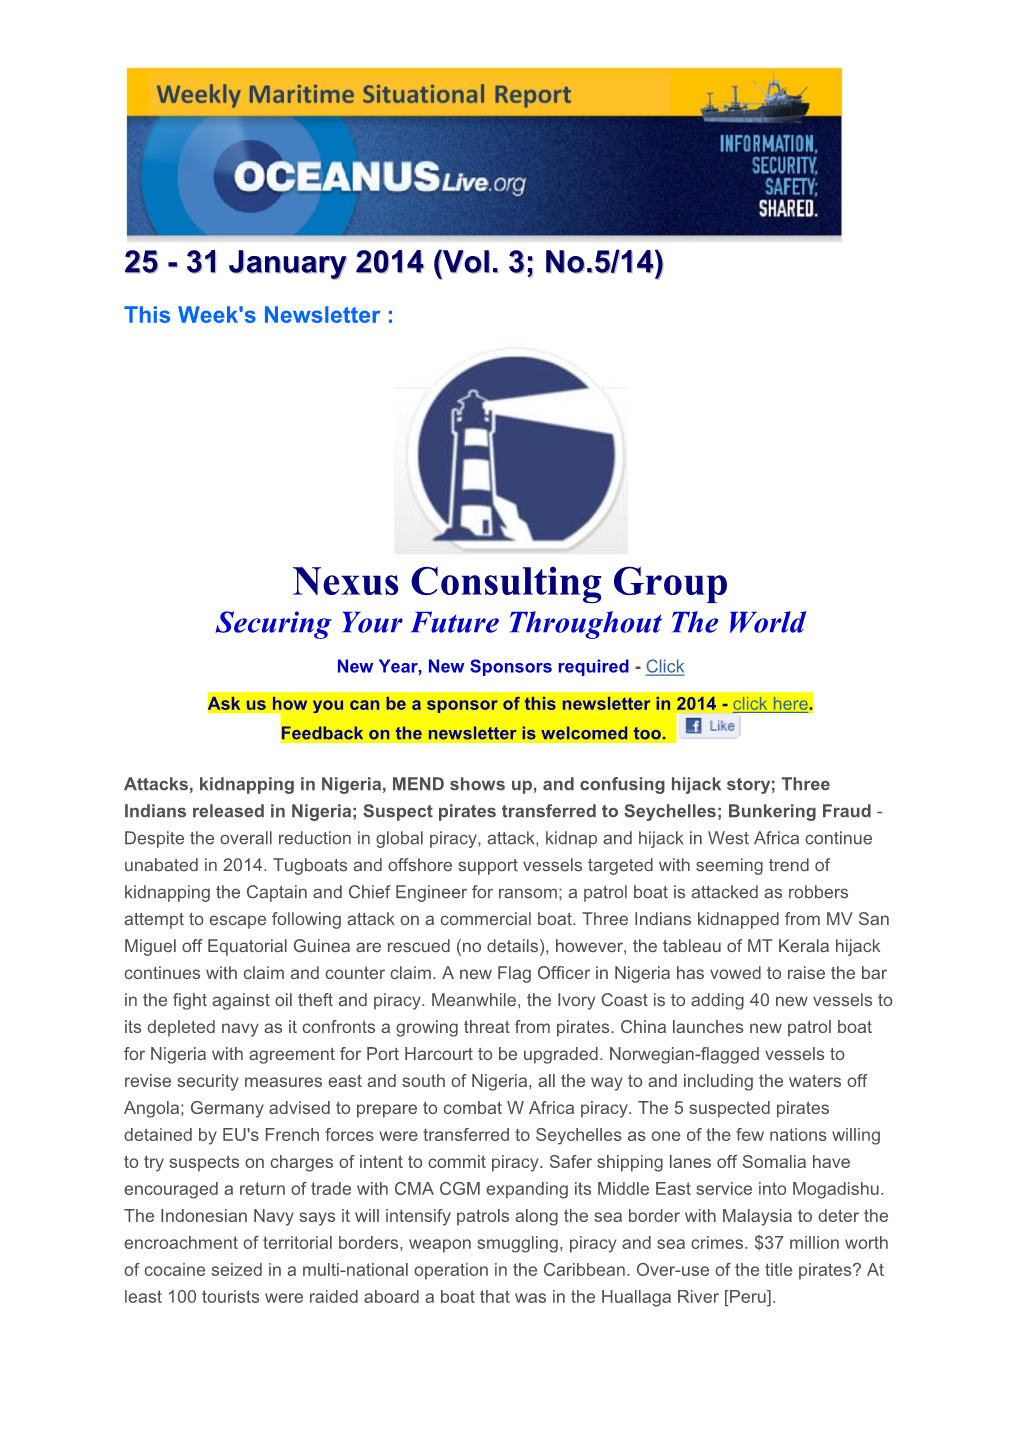 Nexus Consulting Group Securing Your Future Throughout the World